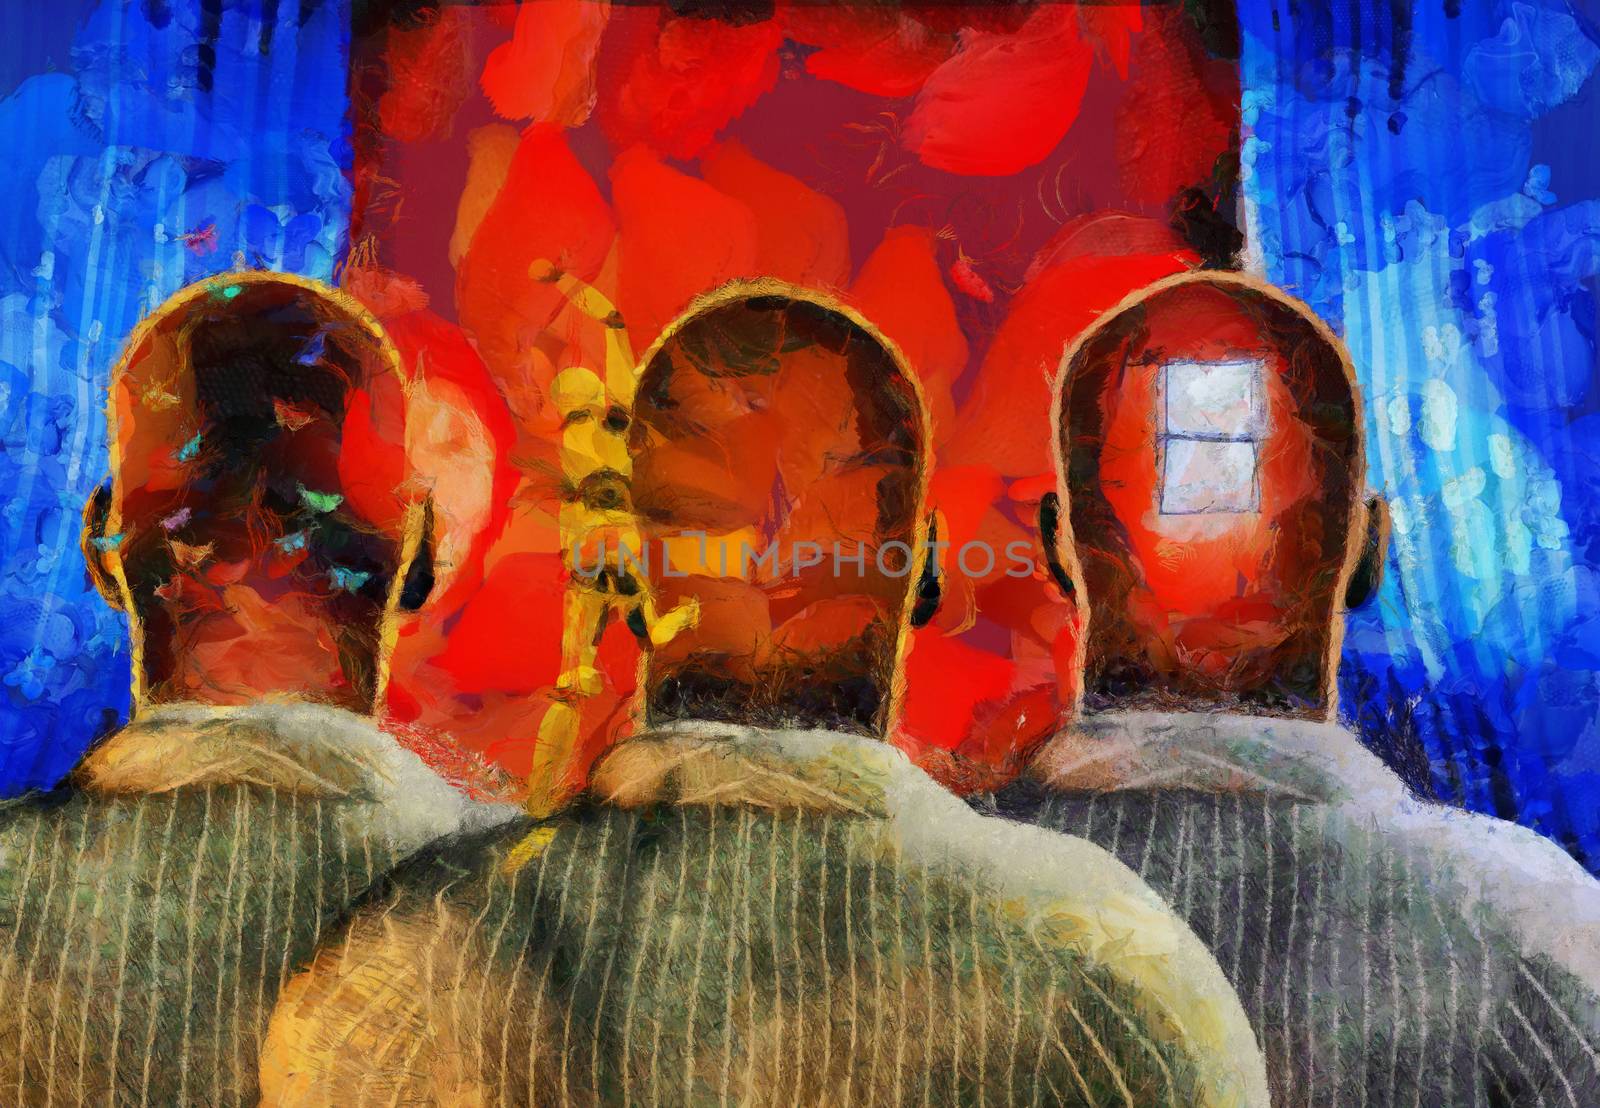 Surreal painting. Men with dreams in their head stands before drapes. Field behind drapes. 3D rendering